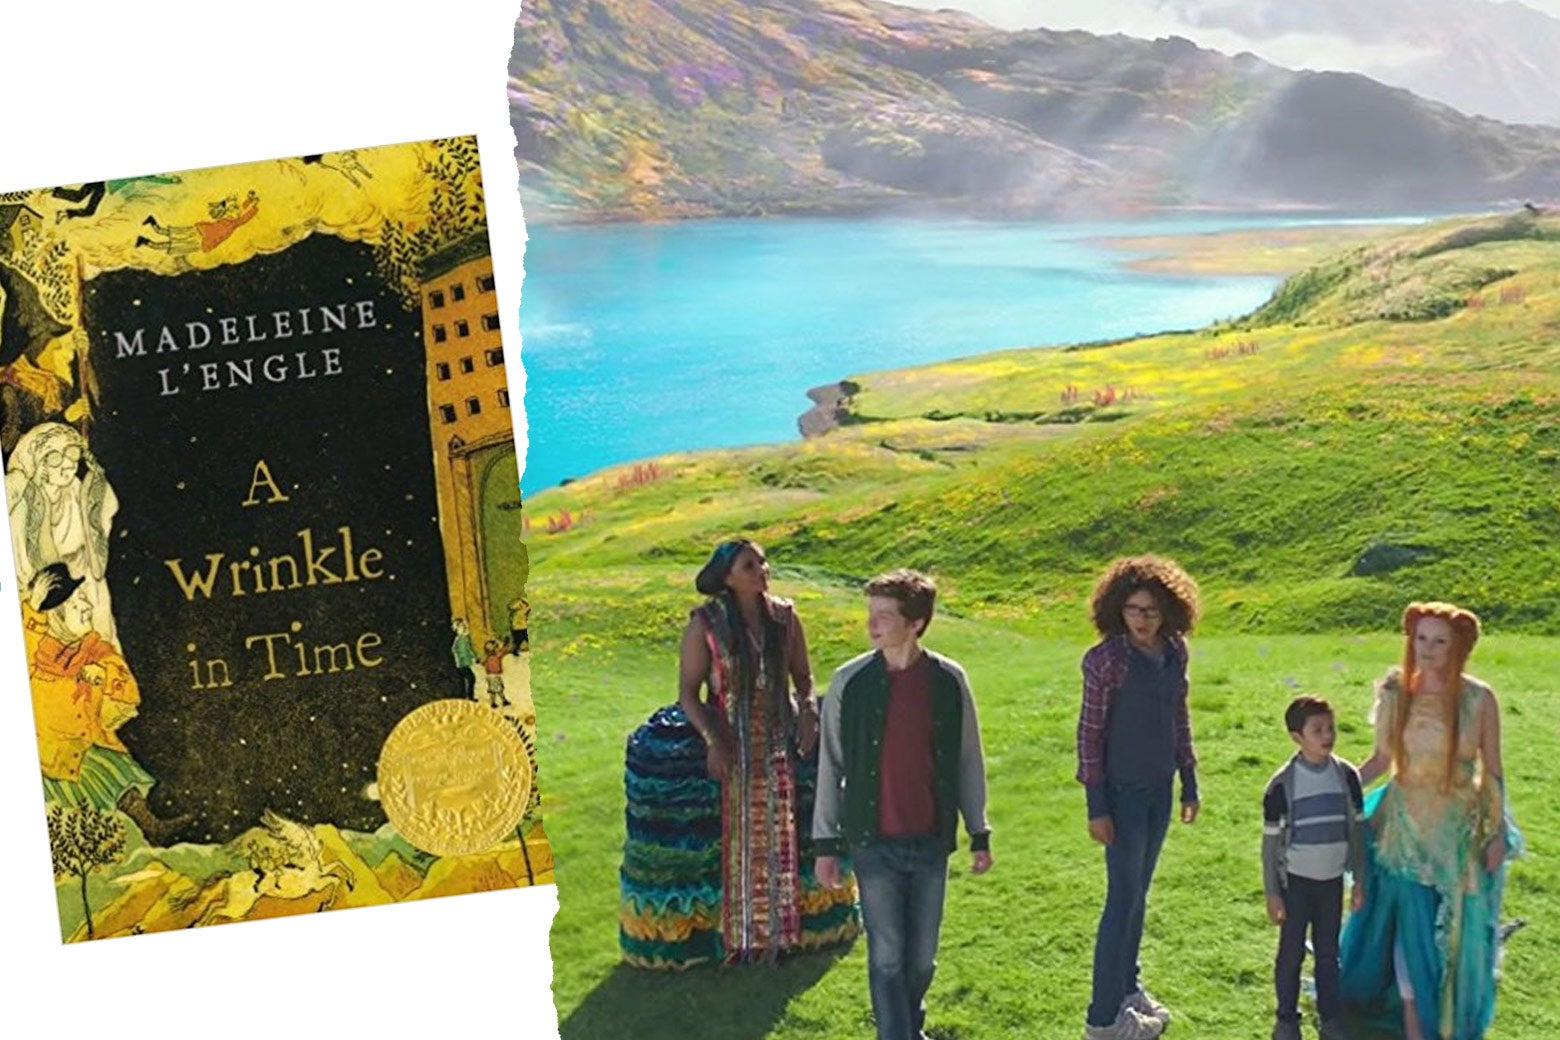 At left: The Wrinkle in Time book jacked. At right: A scene from the film.